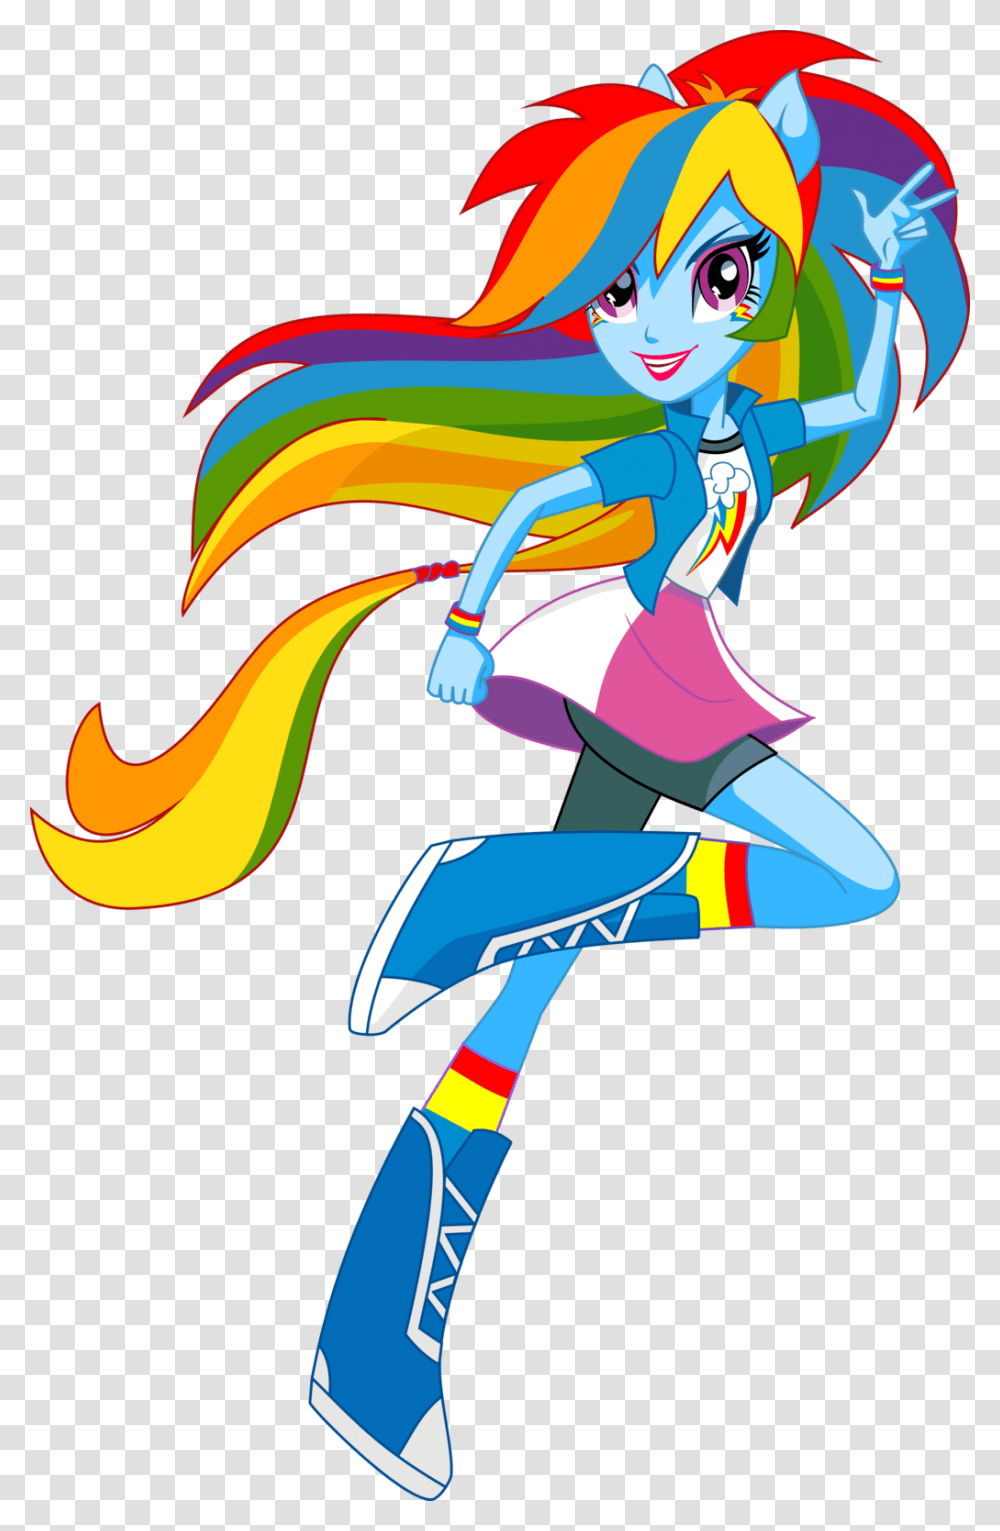 My Little Pony Coloring Pages Rarity In Dress For Kids Rainbow Dash Equestria Girl, Modern Art, Drawing Transparent Png